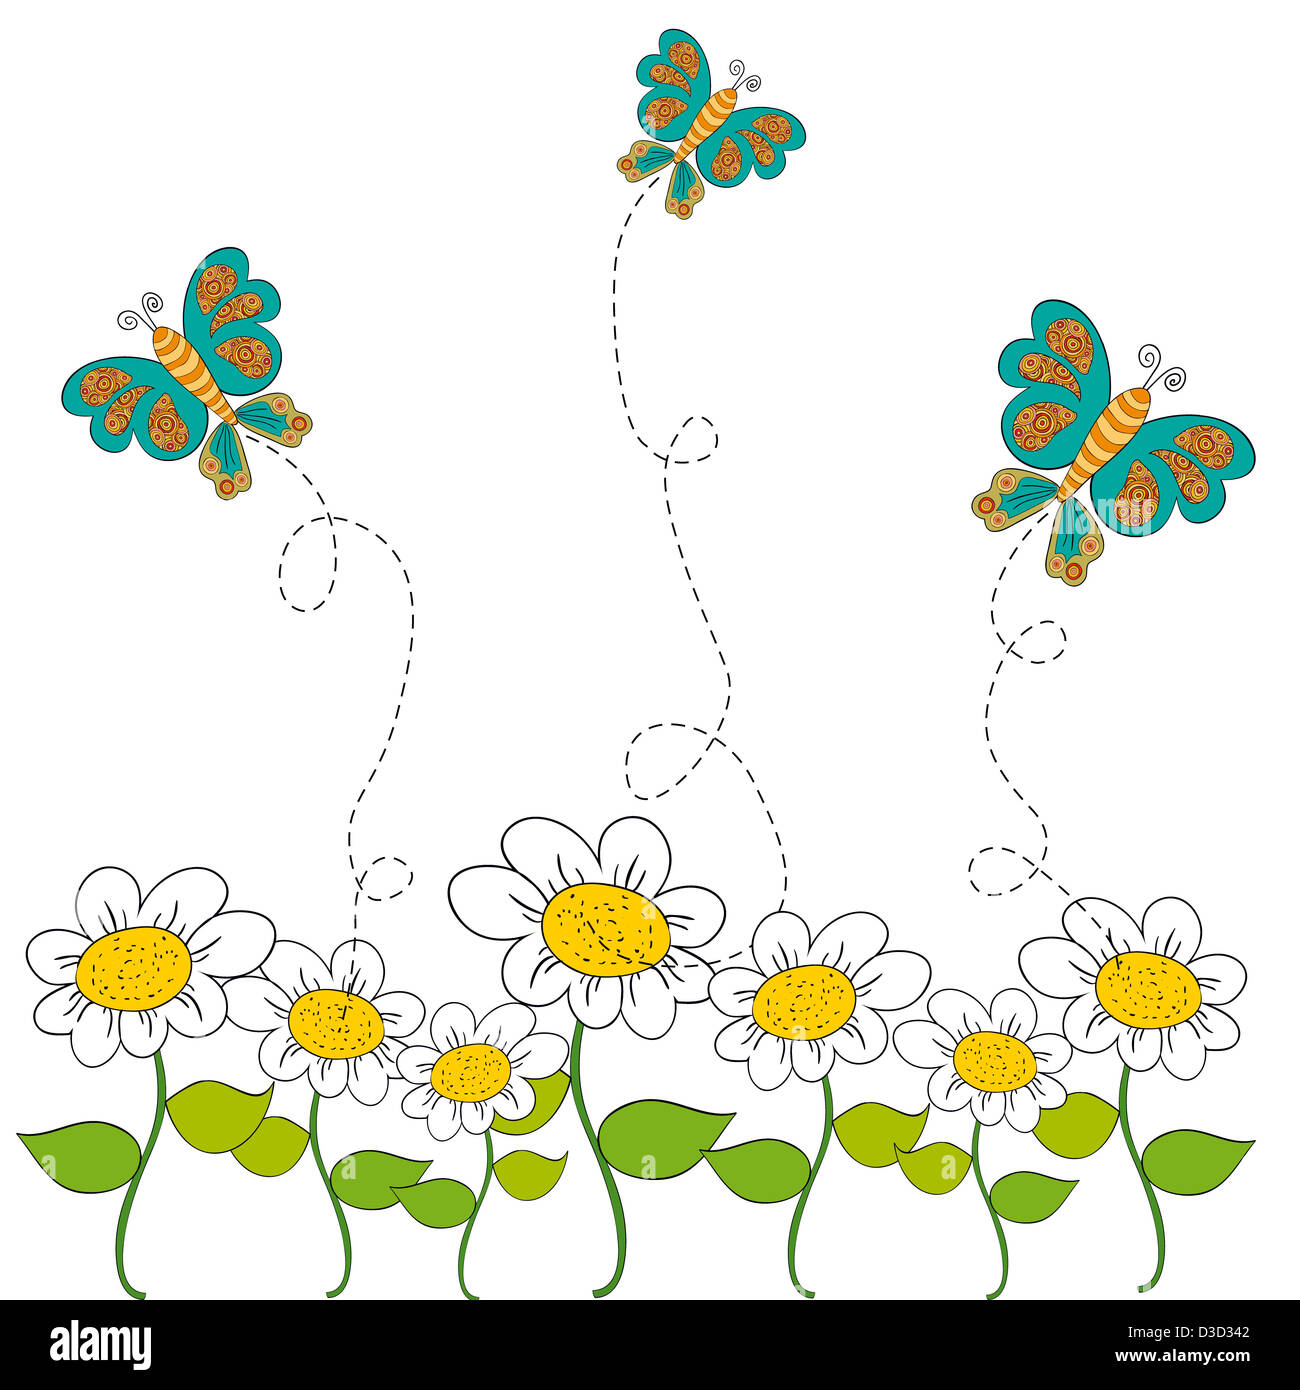 Flying butterfly and flowers spring background. Vector file layered for easy manipulation and custom coloring. Stock Photo